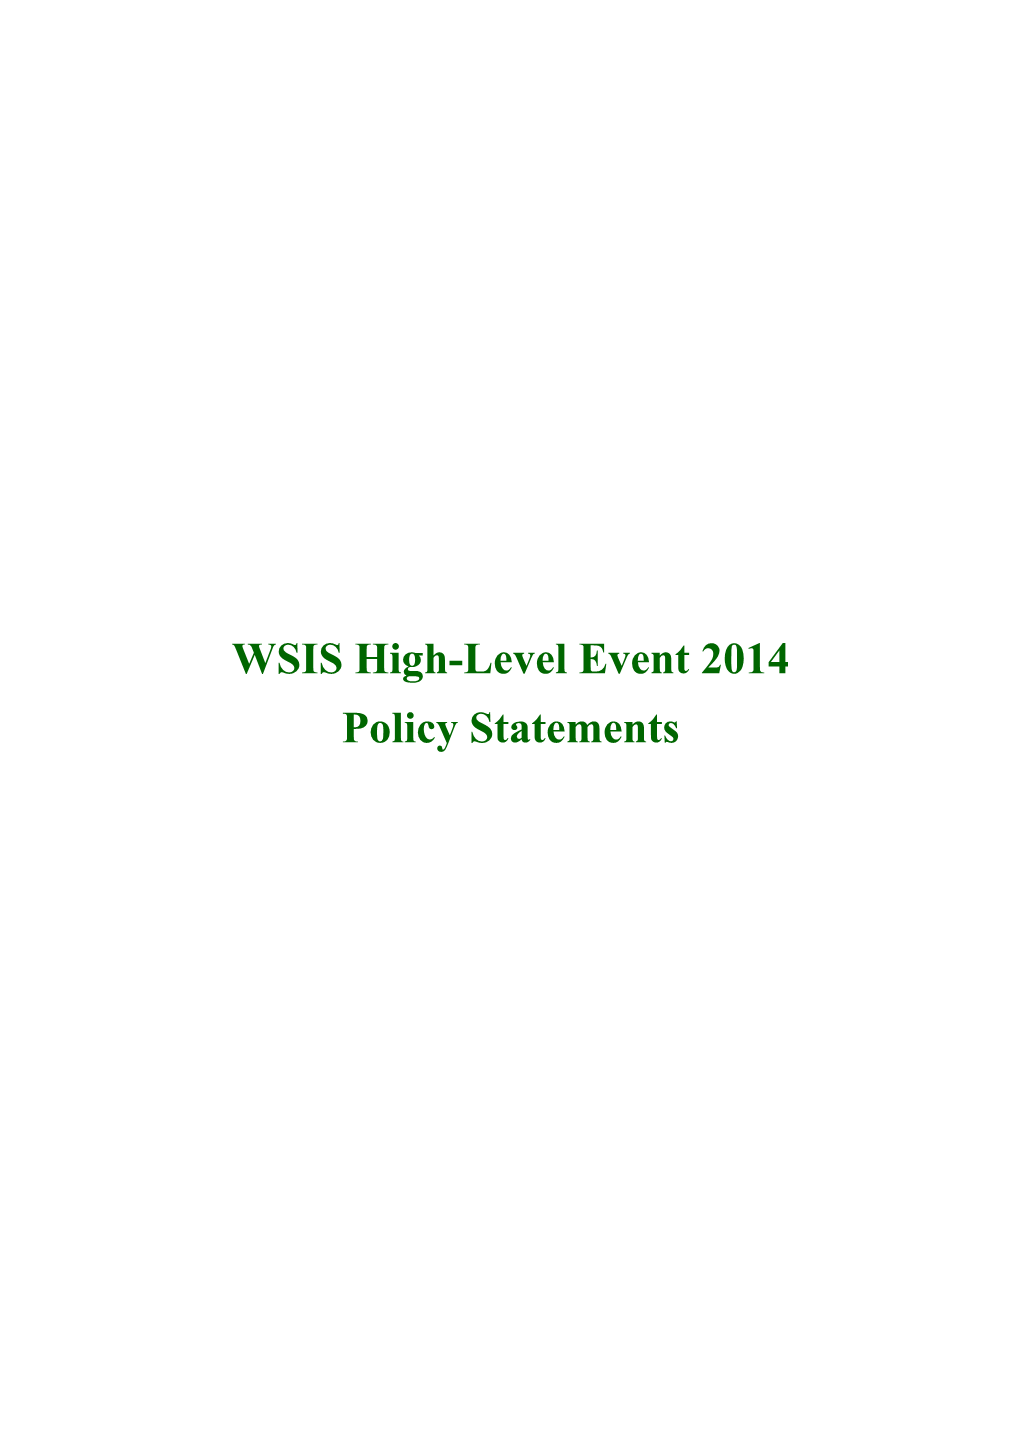 WSIS High-Level Event 2014 Policy Statements